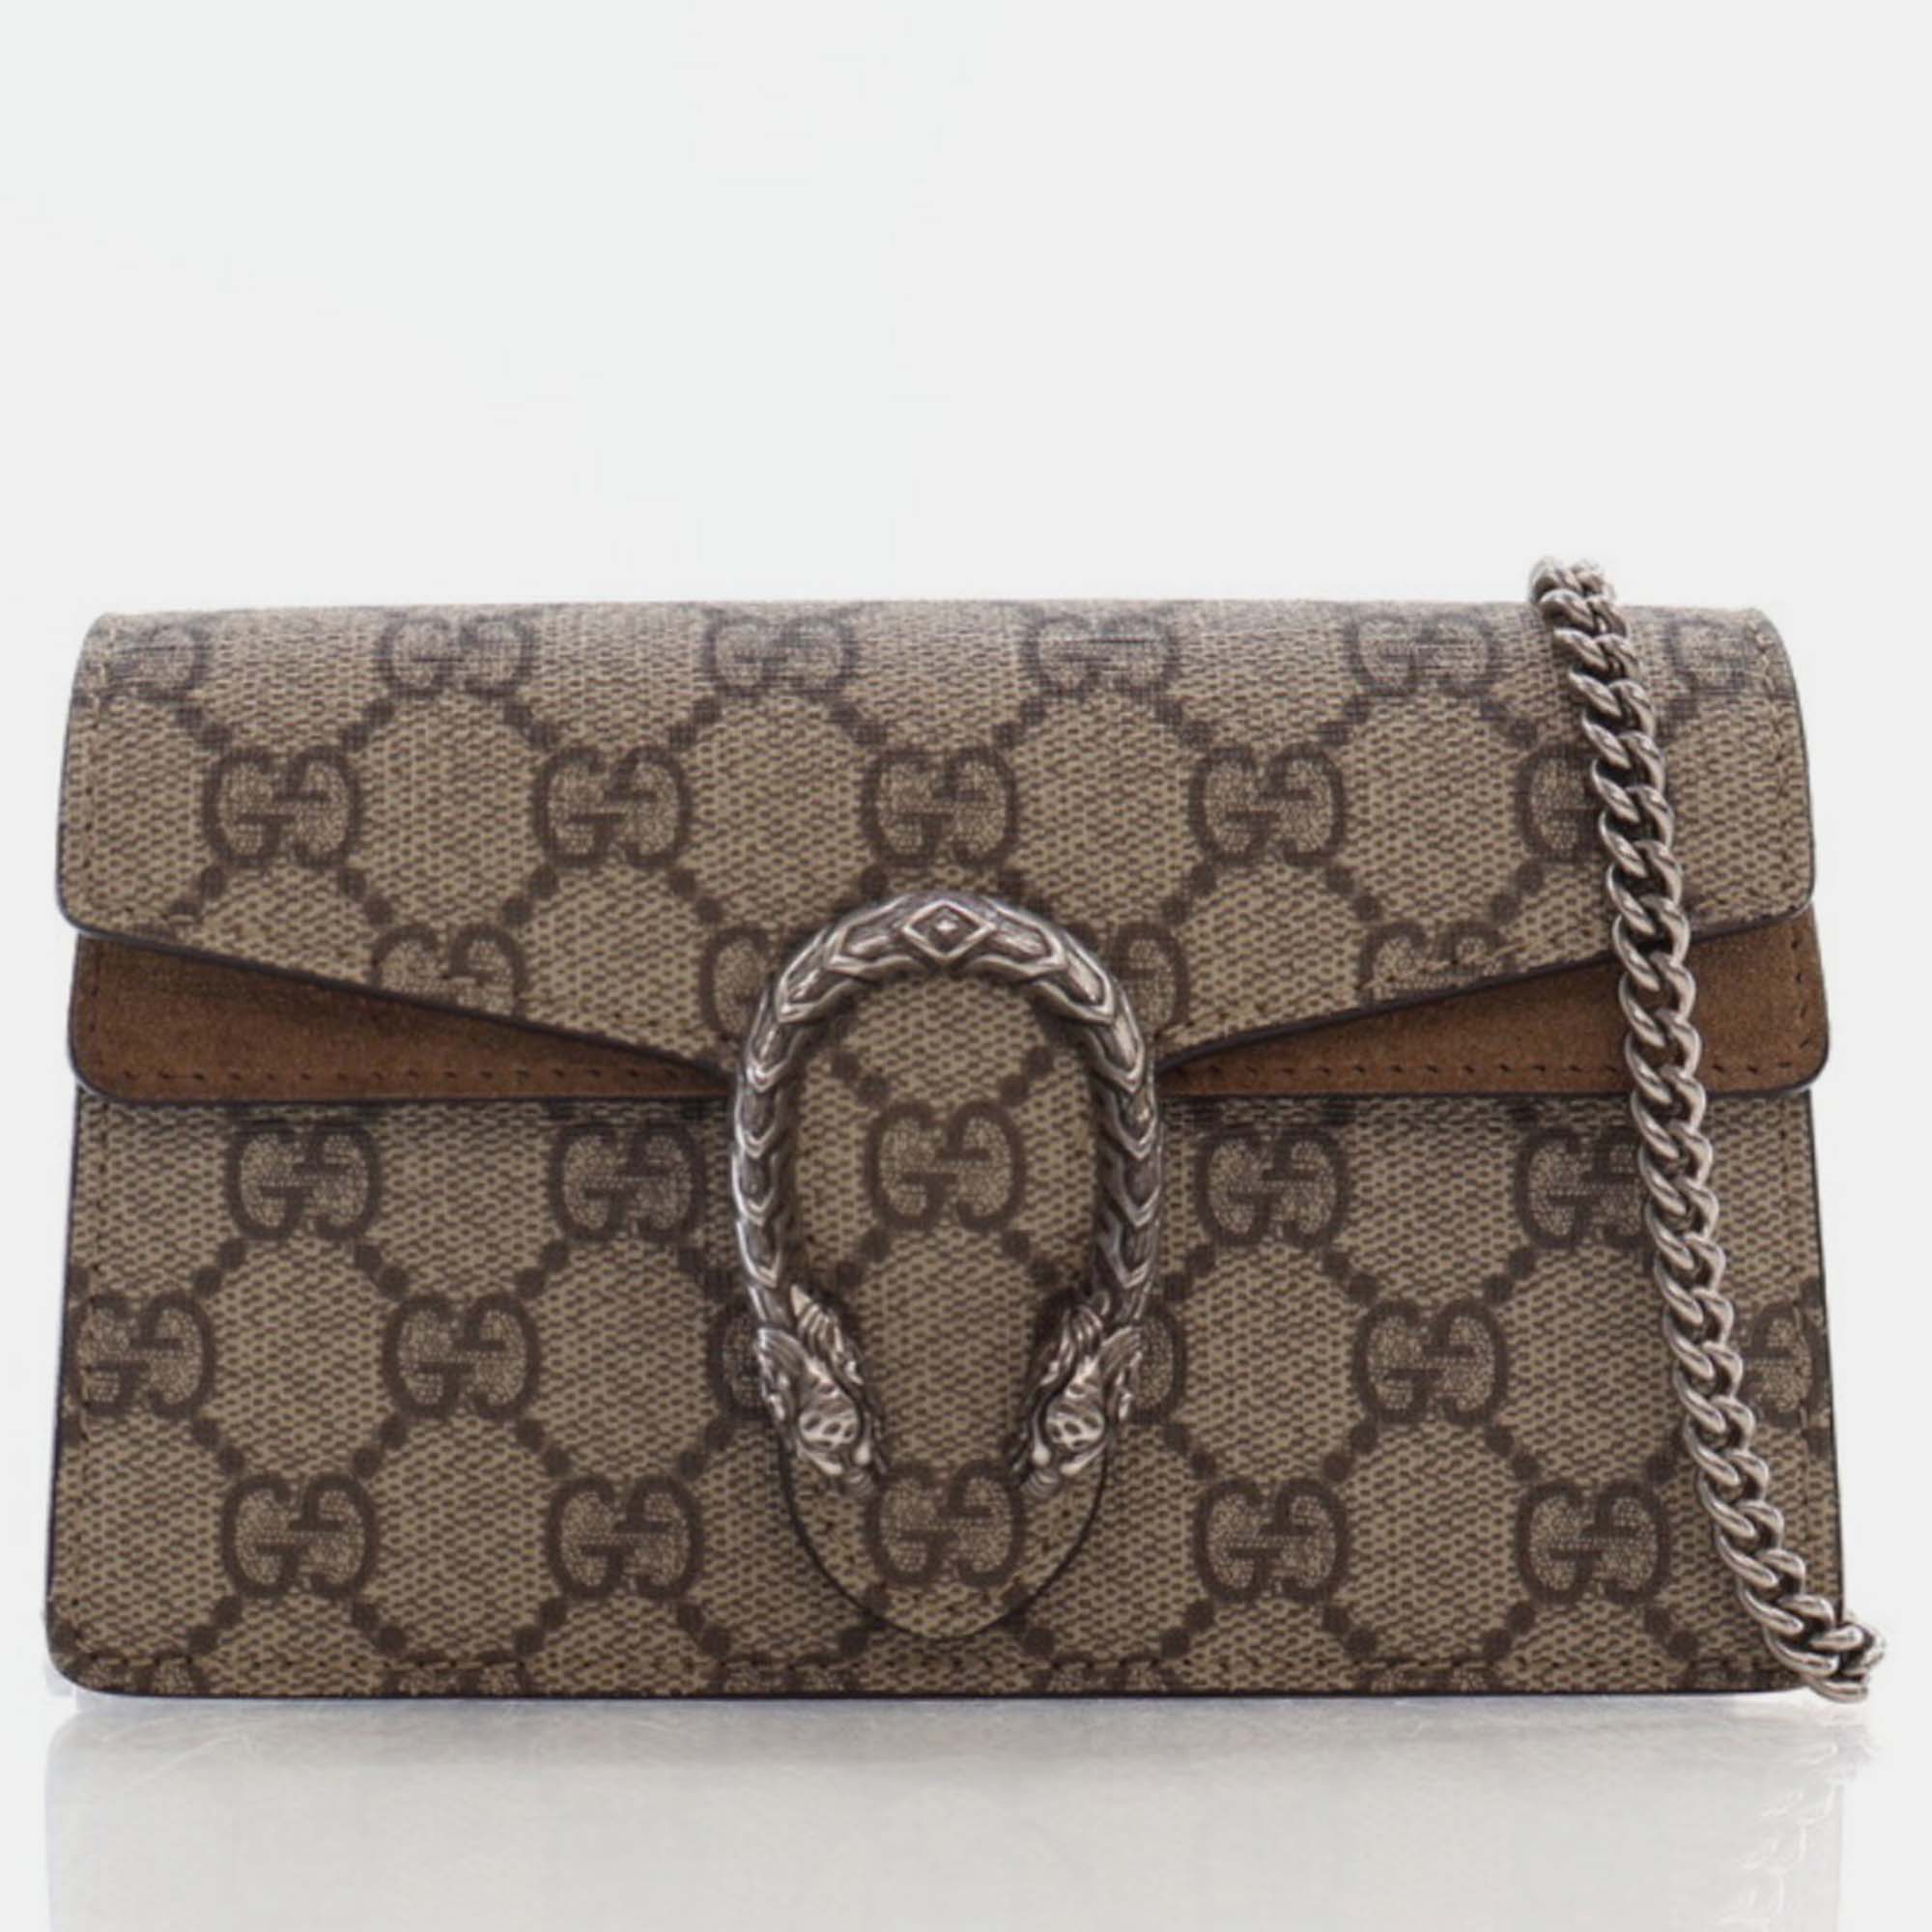 Gucci brown gg canvas, suede small dionysus shoulder bags